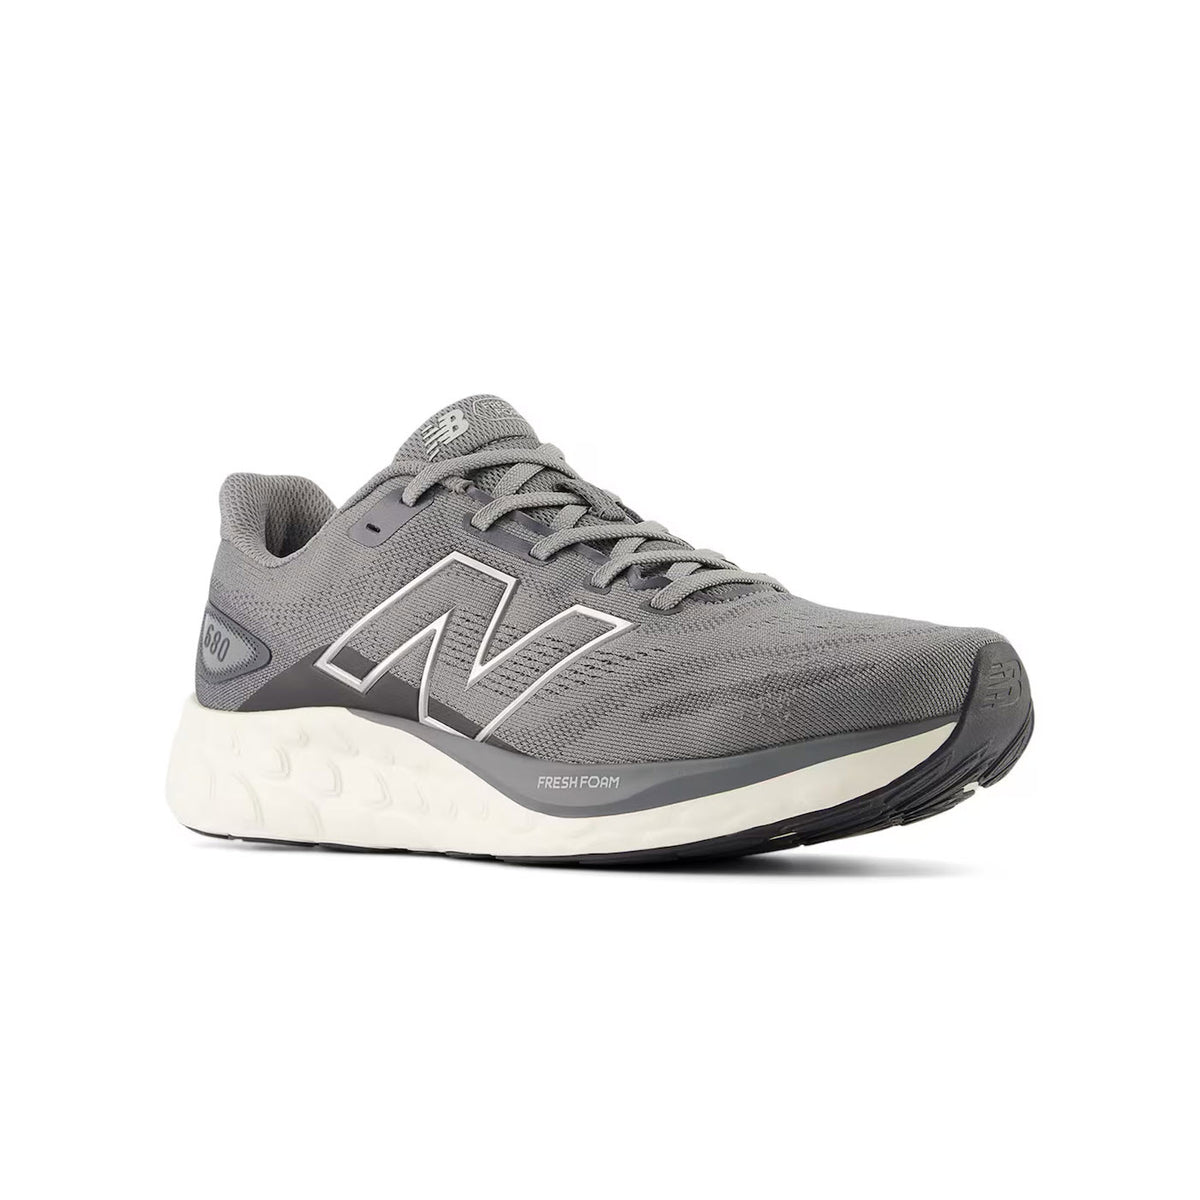 A single New Balance 680v8 Blue Harbor Grey/Magnet/Dark Silver running shoe, featuring a prominent logo and cushioned midsole, displayed against a white background.